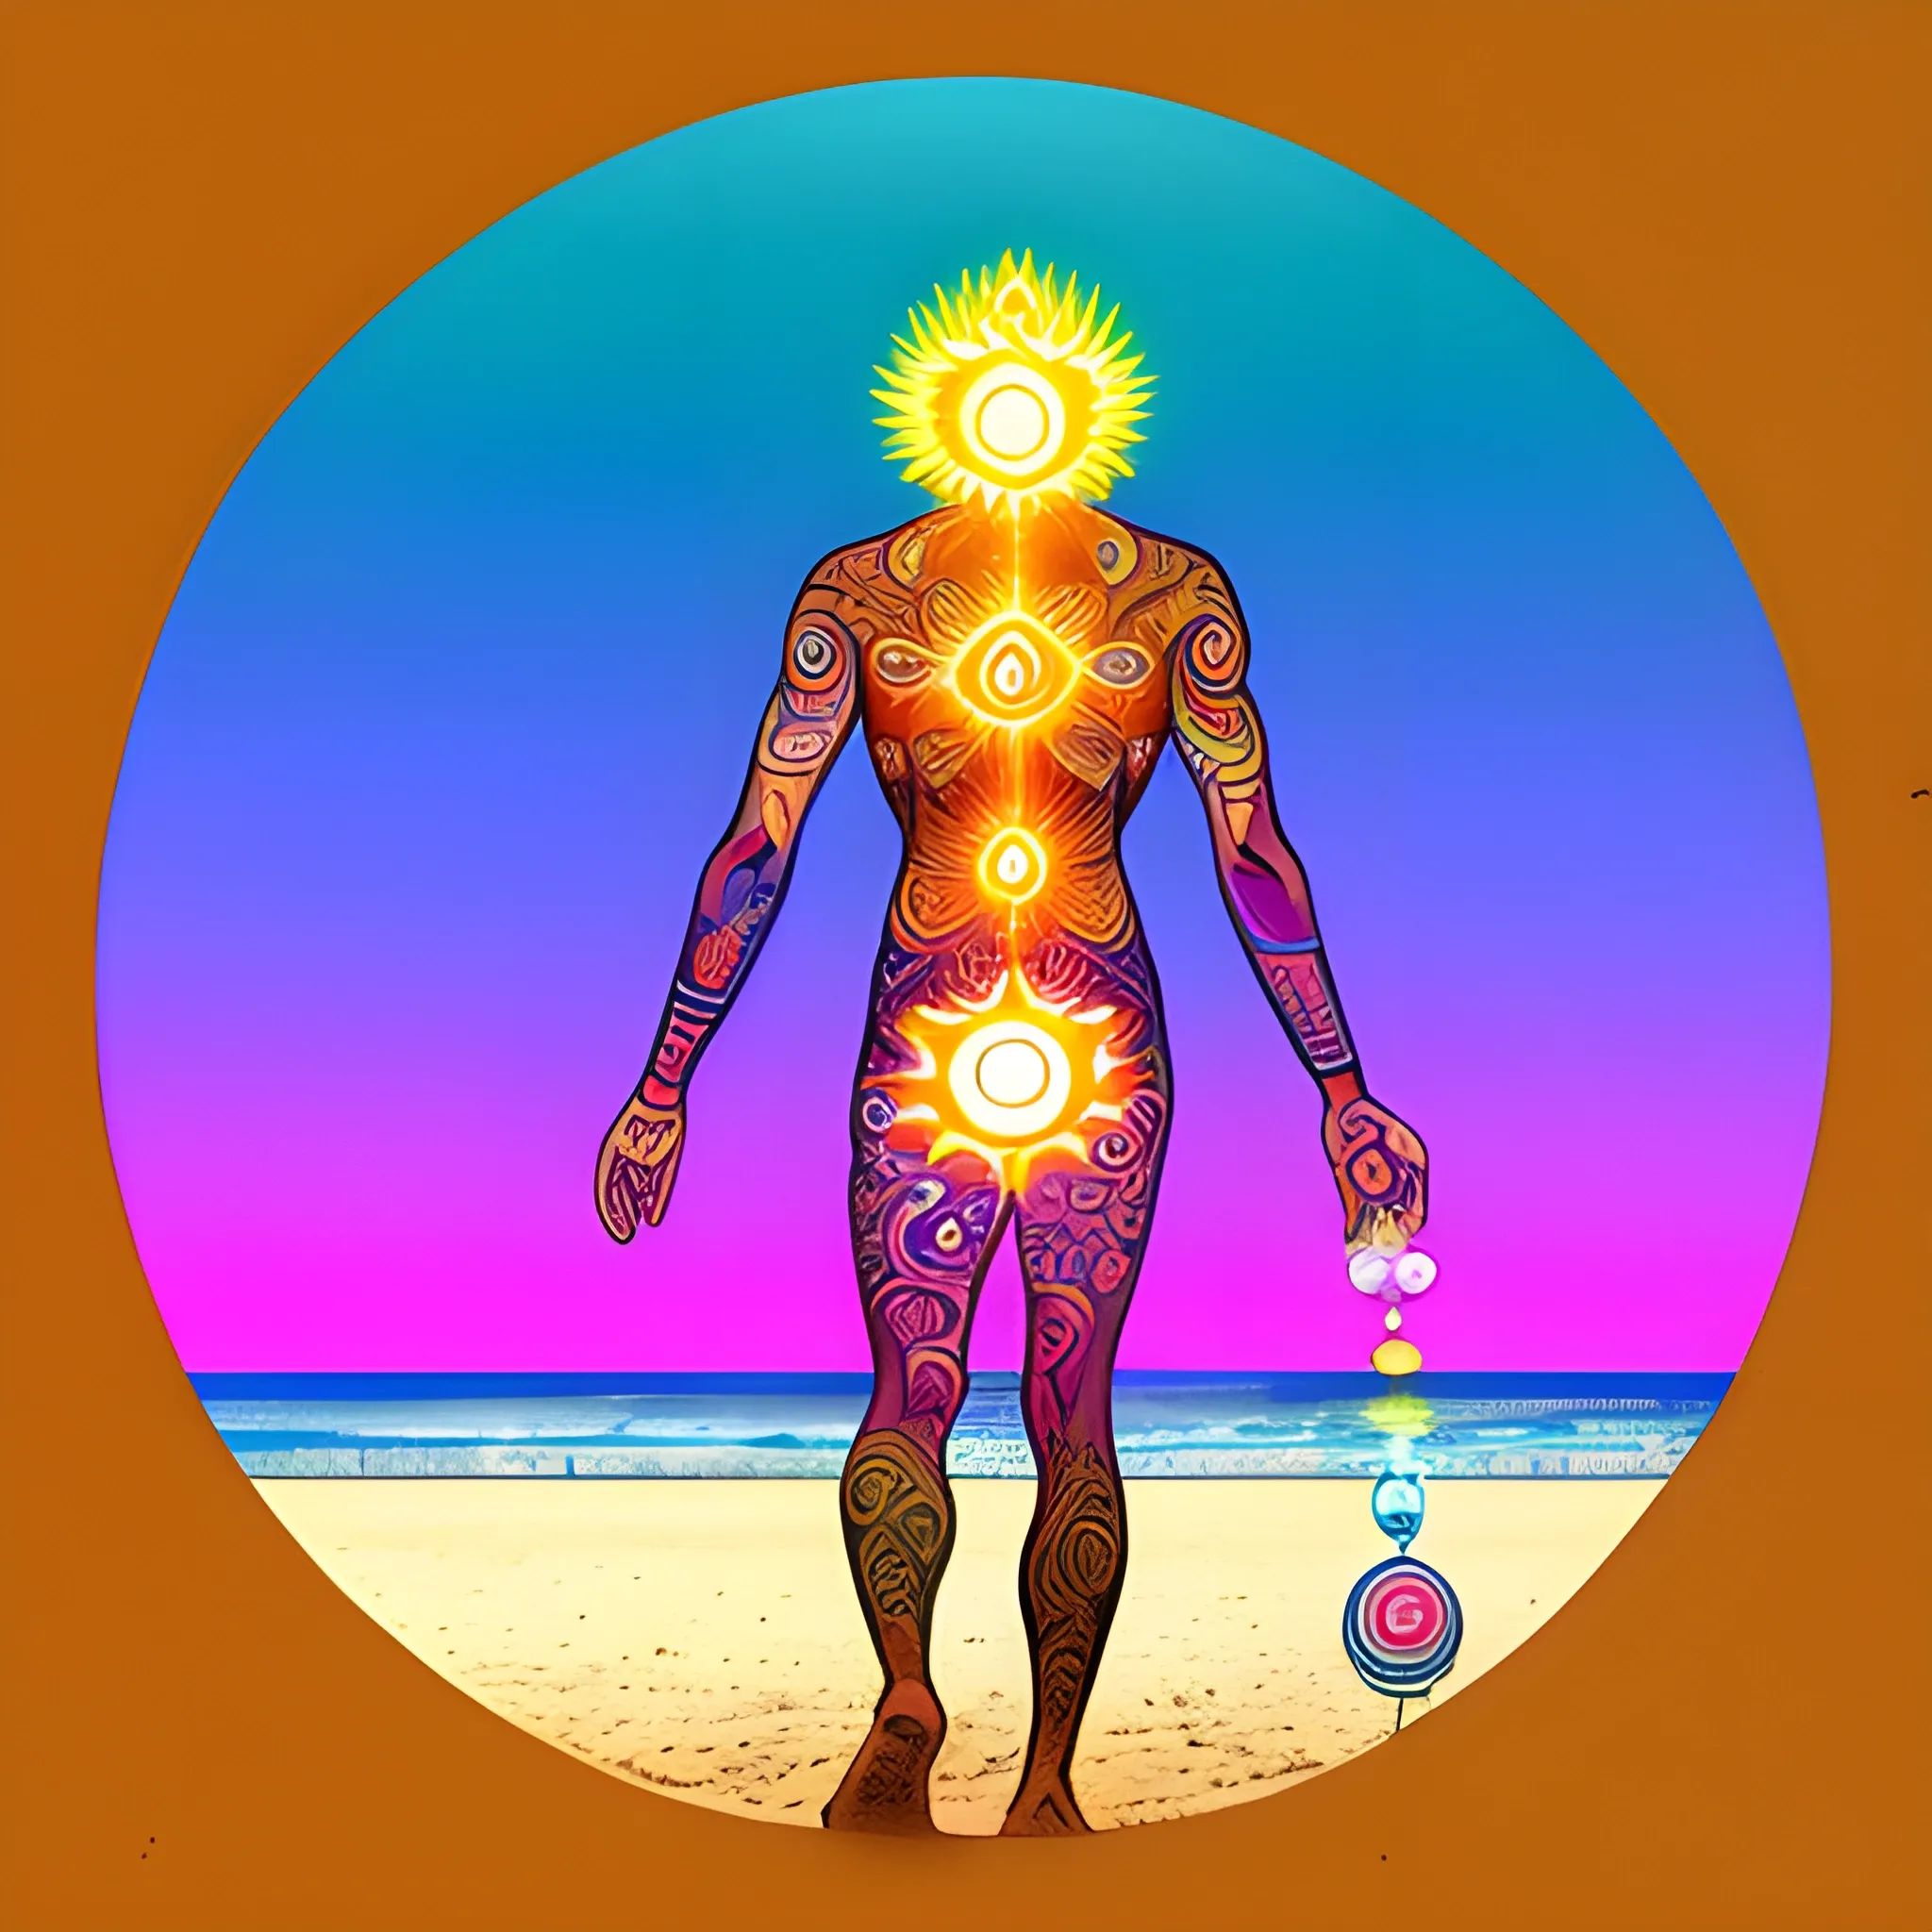 
man with the seven chakras on his back, beach, sunset, universe, walking to the sea, initiation, footprints in the sand, Cartoon, Trippy